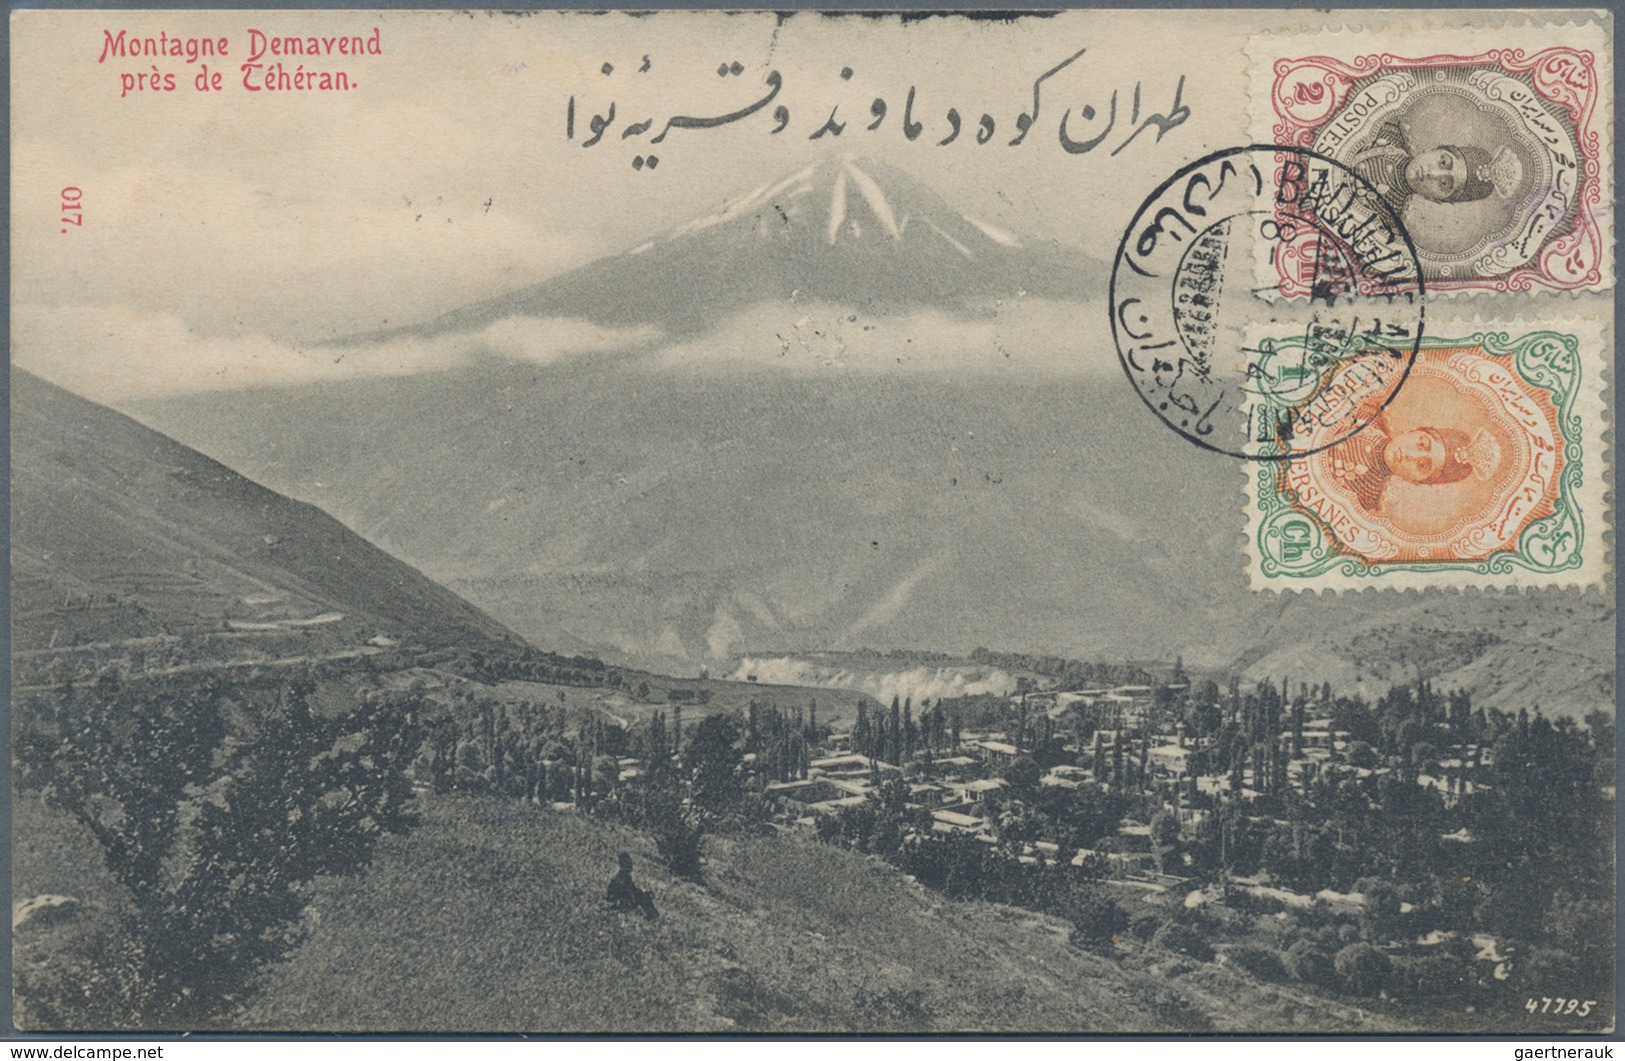 Iran: 1900-20 Ca., 20 Postcards Most Postally Used, A Very Scarce Offer, Please Inspect - Iran